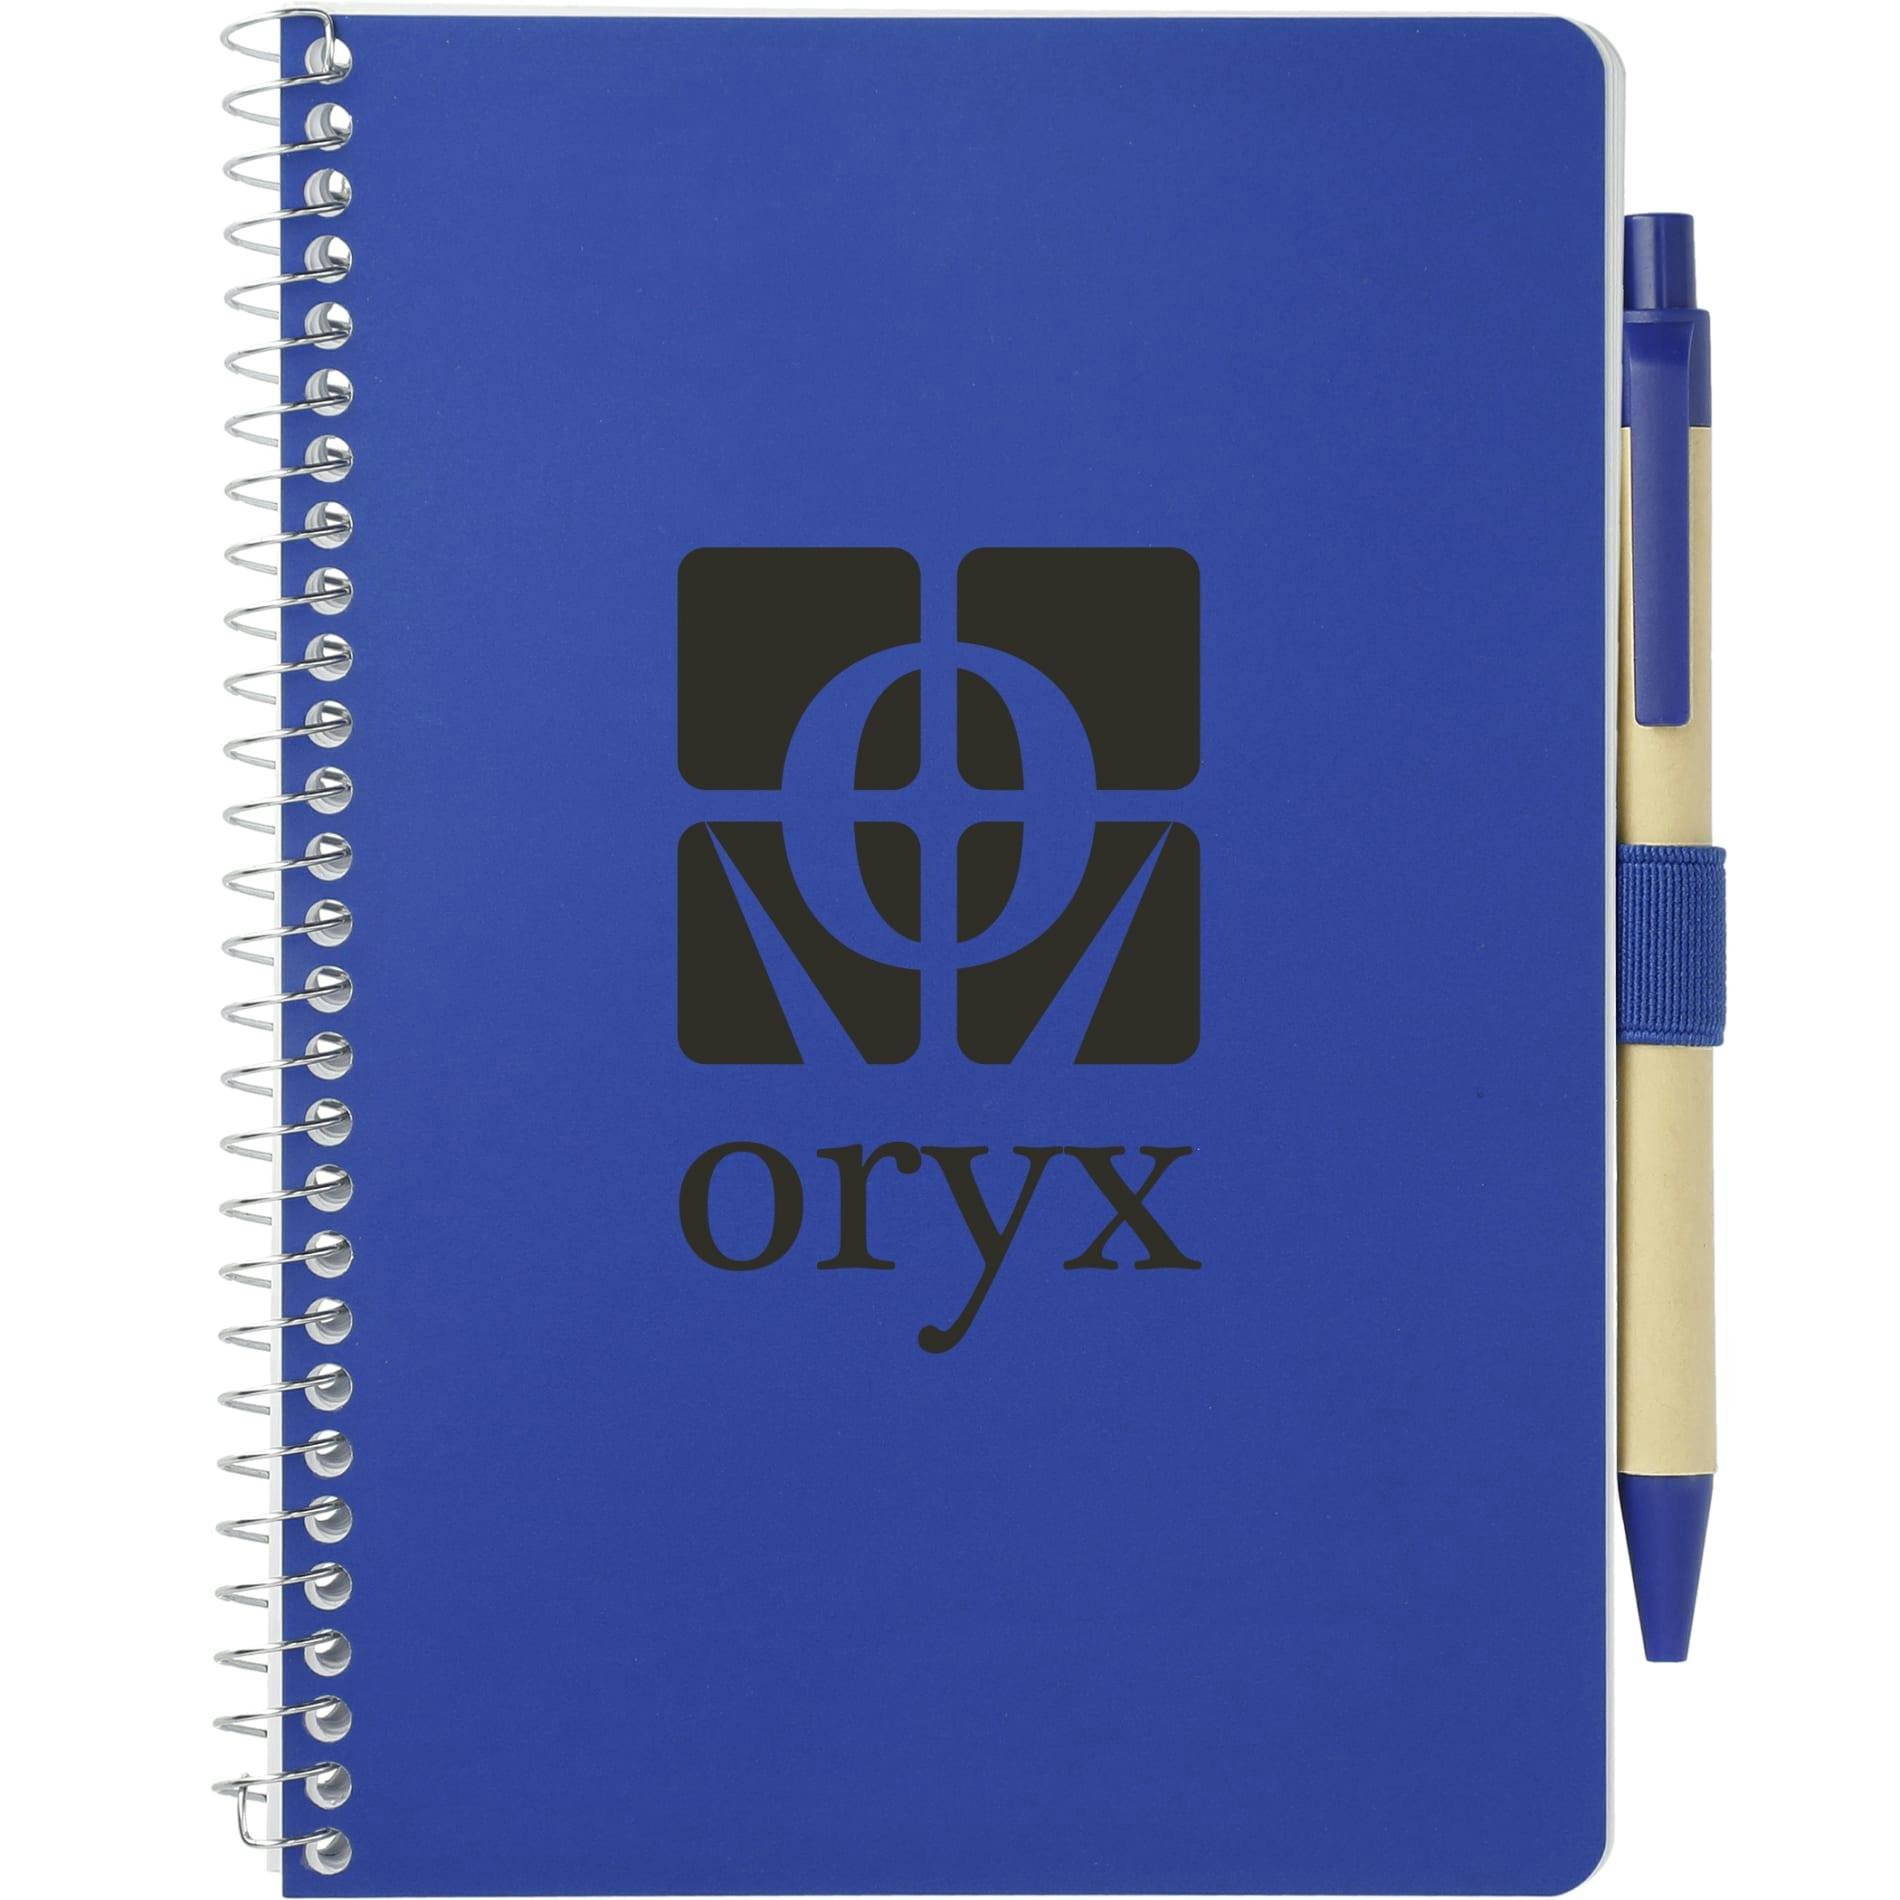 5” x 7” FSC® Mix Spiral Notebook with Pen - additional Image 2